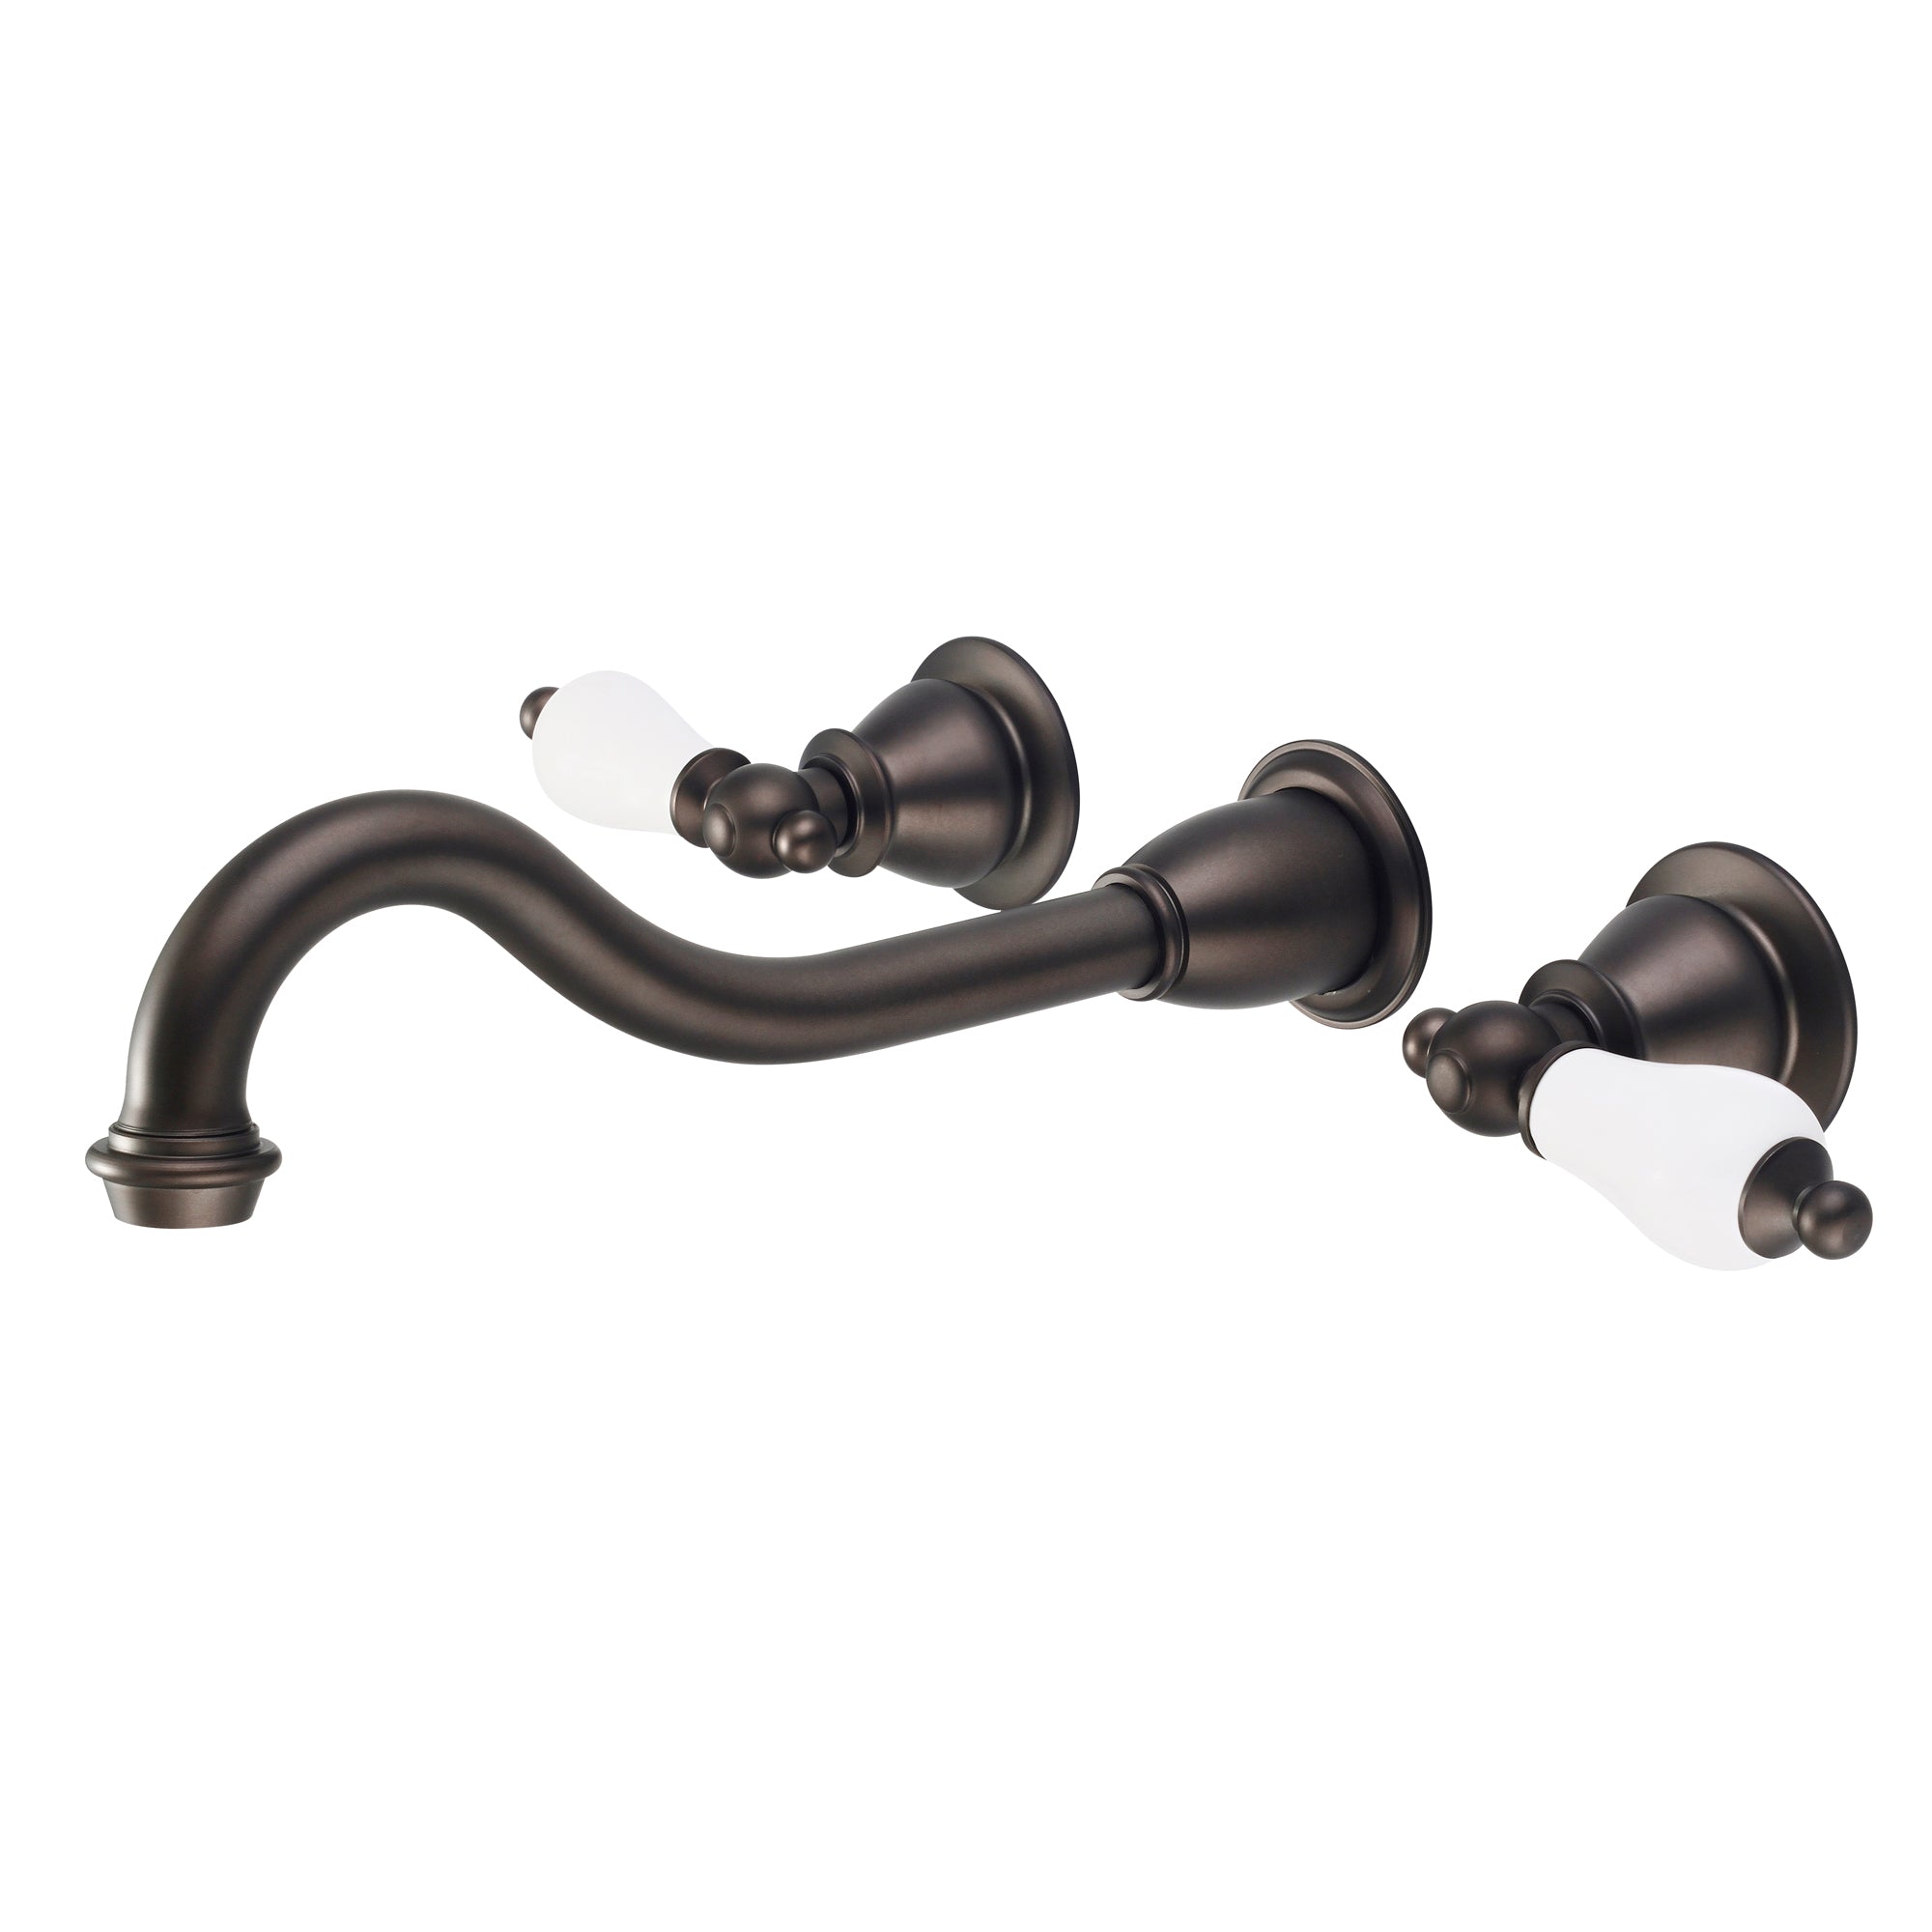 Water Creation | Elegant Spout Wall Mount Vessel/Lavatory Faucets in Oil-rubbed Bronze Finish Finish With Porcelain Lever Handles Without labels | F4-0001-03-PL